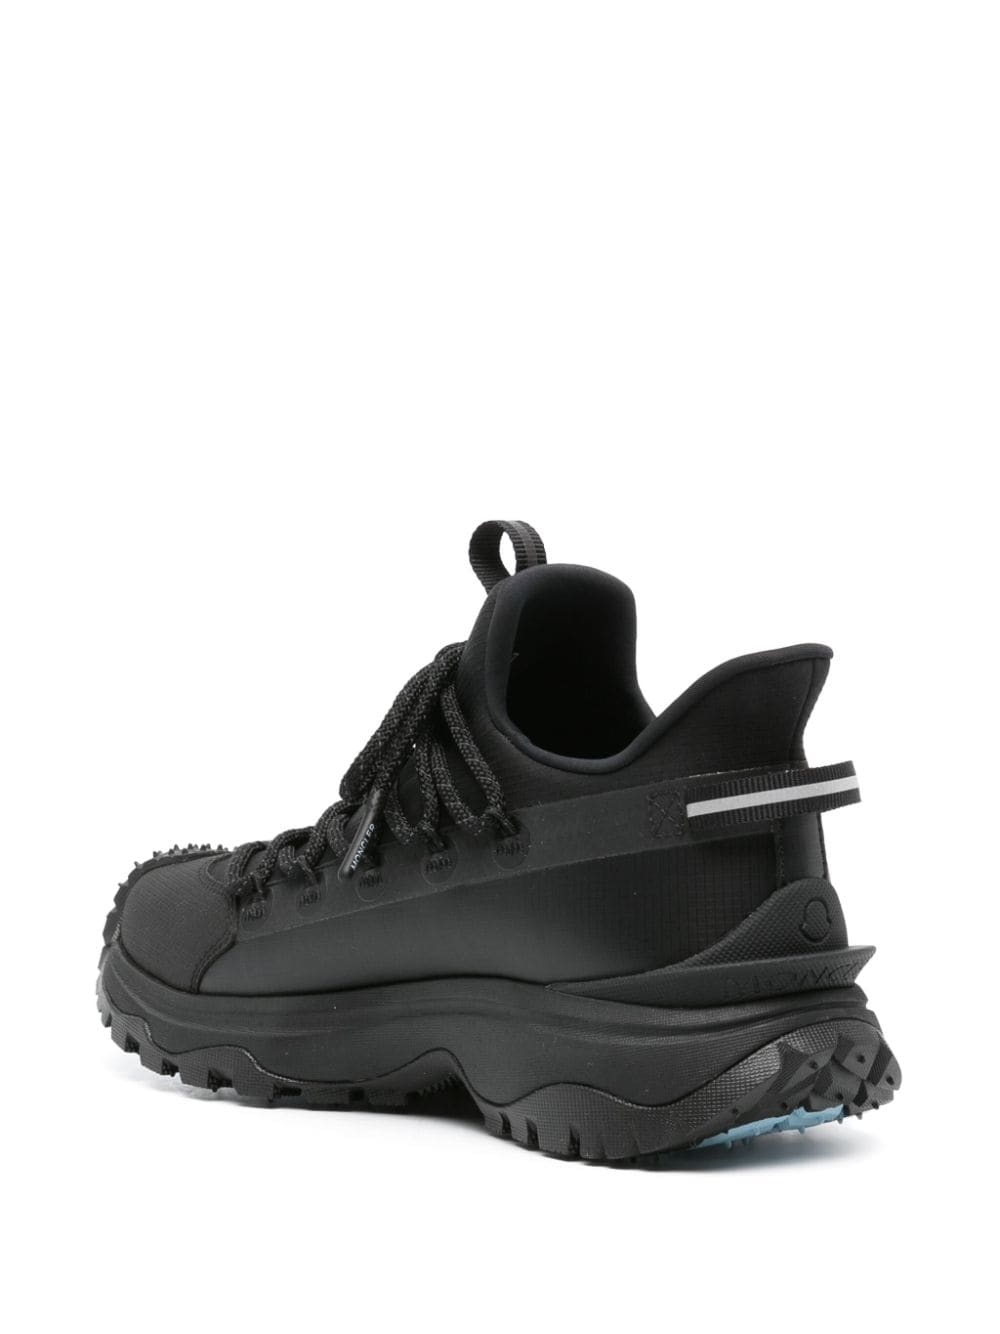 Trailgrip Lite 2 ripstop sneakers<BR/><BR/><BR/>